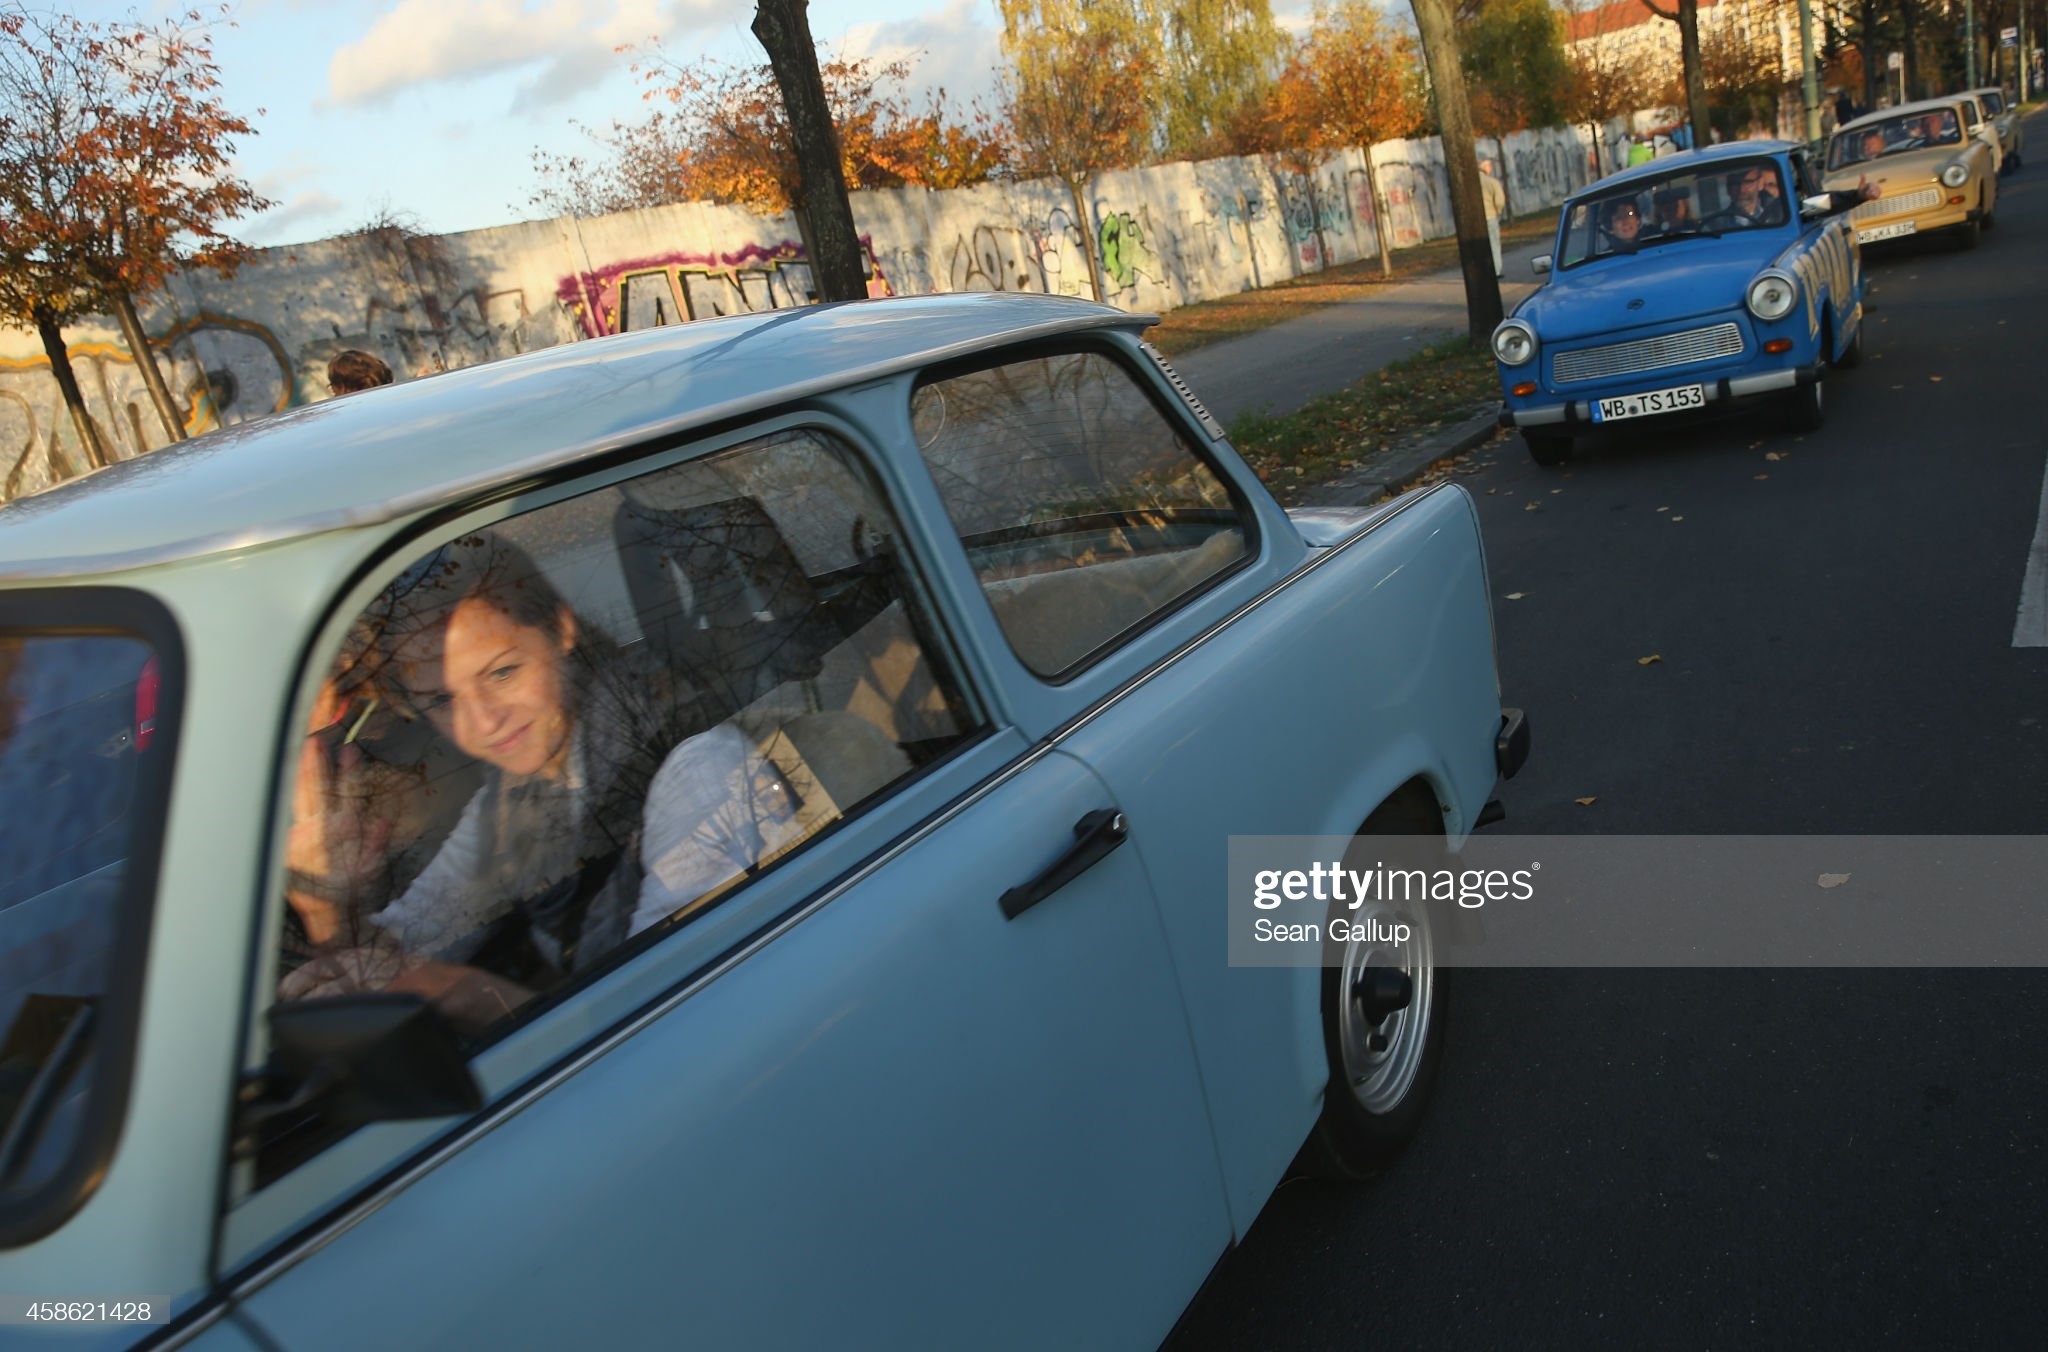 Visitors in East German-era Trabant cars drive next to a still-standing section of the Berlin Wall at Bornholmer Strasse, where nearly 25 years before East Germans crossed into West Berlin, the day before the 25th anniversary of the fall of the Wall on November 08, 2014 in Berlin, Germany. 